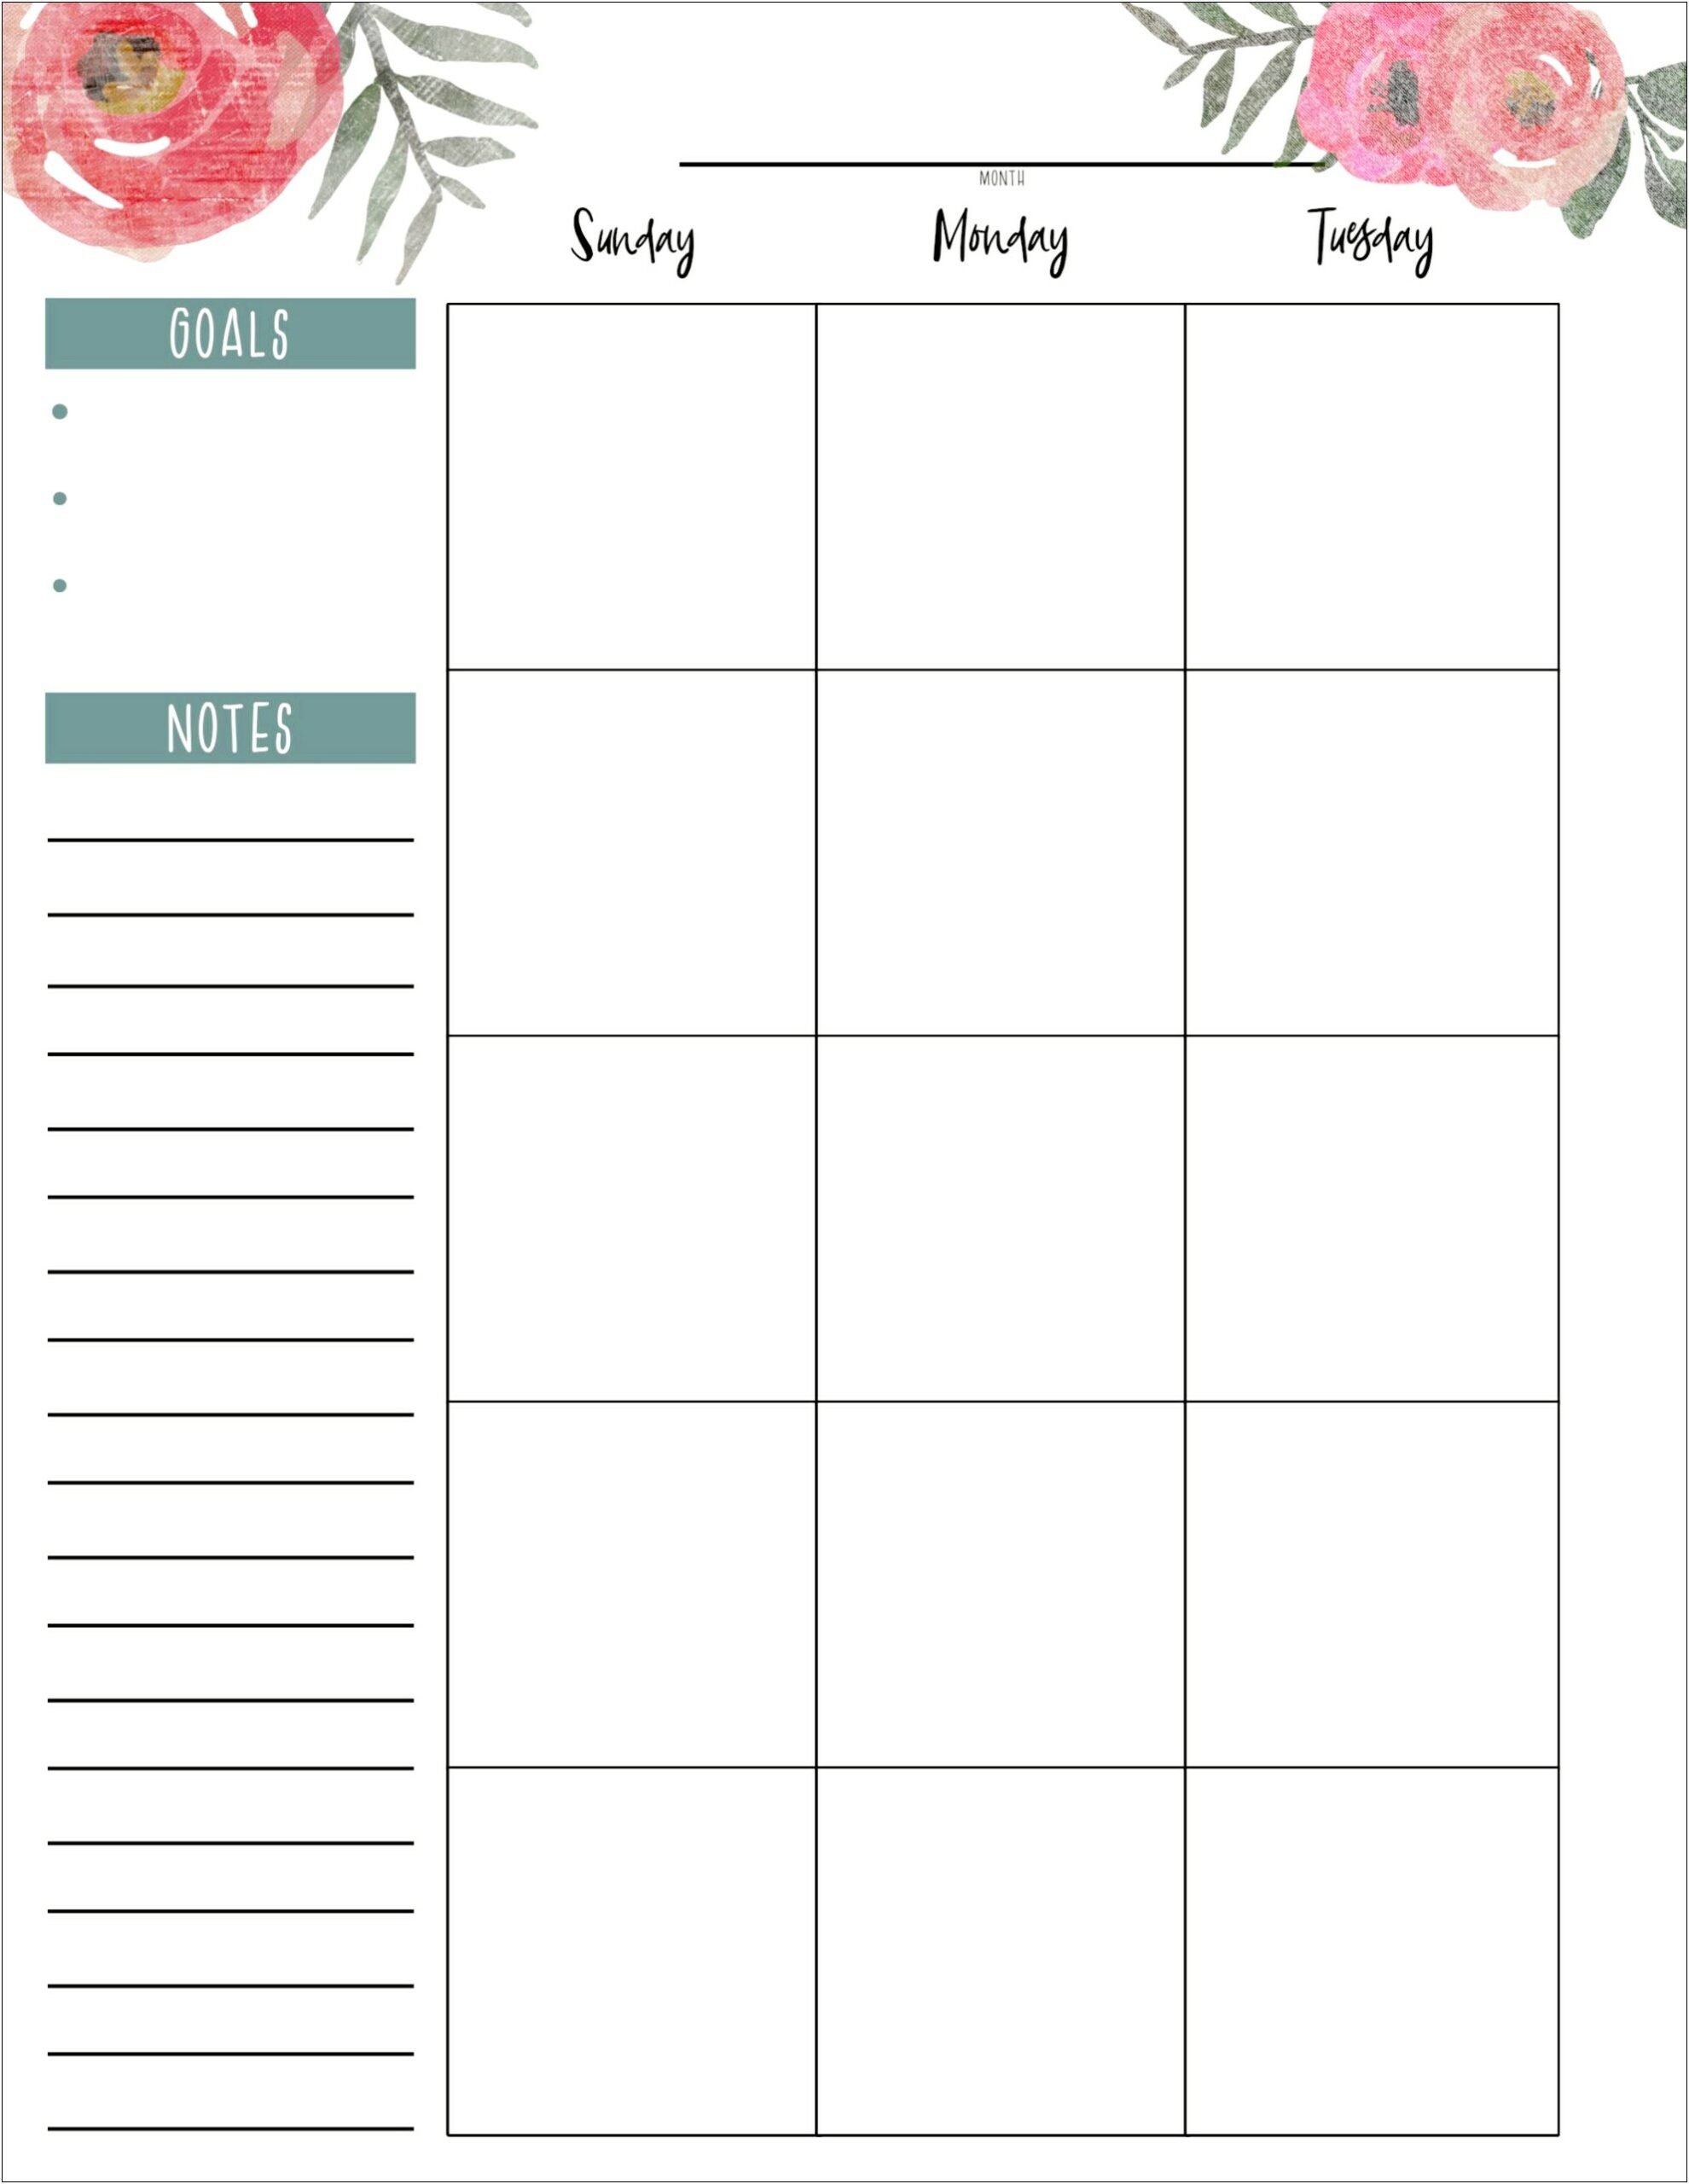 Free Printable Planner Happy Planner Style Template